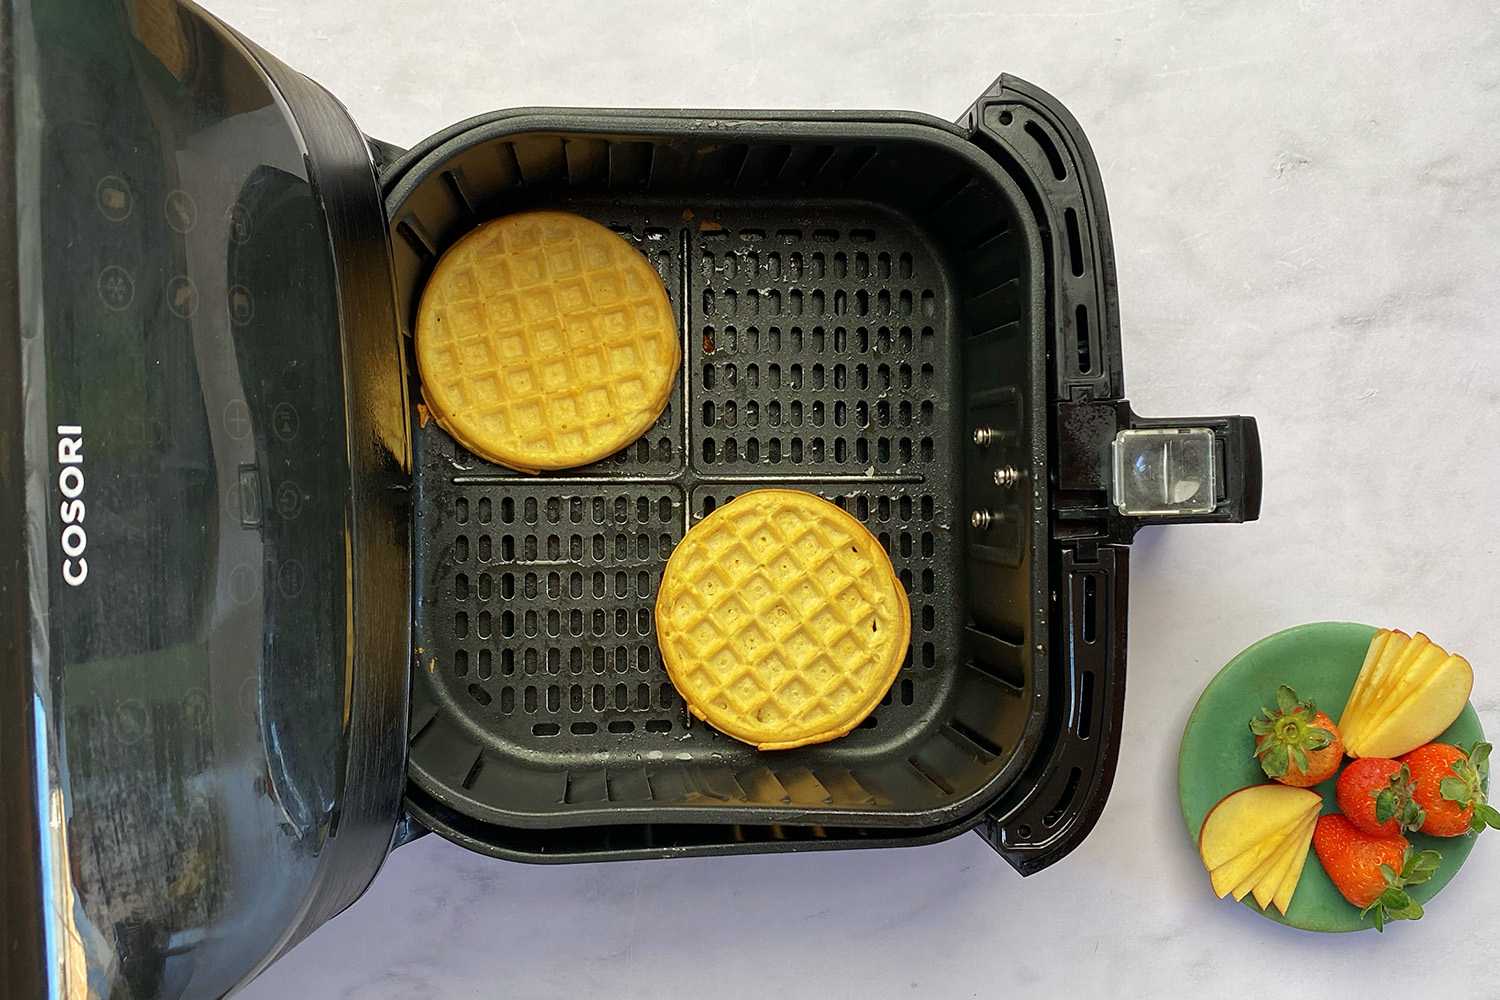 Frozen waffles after just a few minutes in the air fryer.